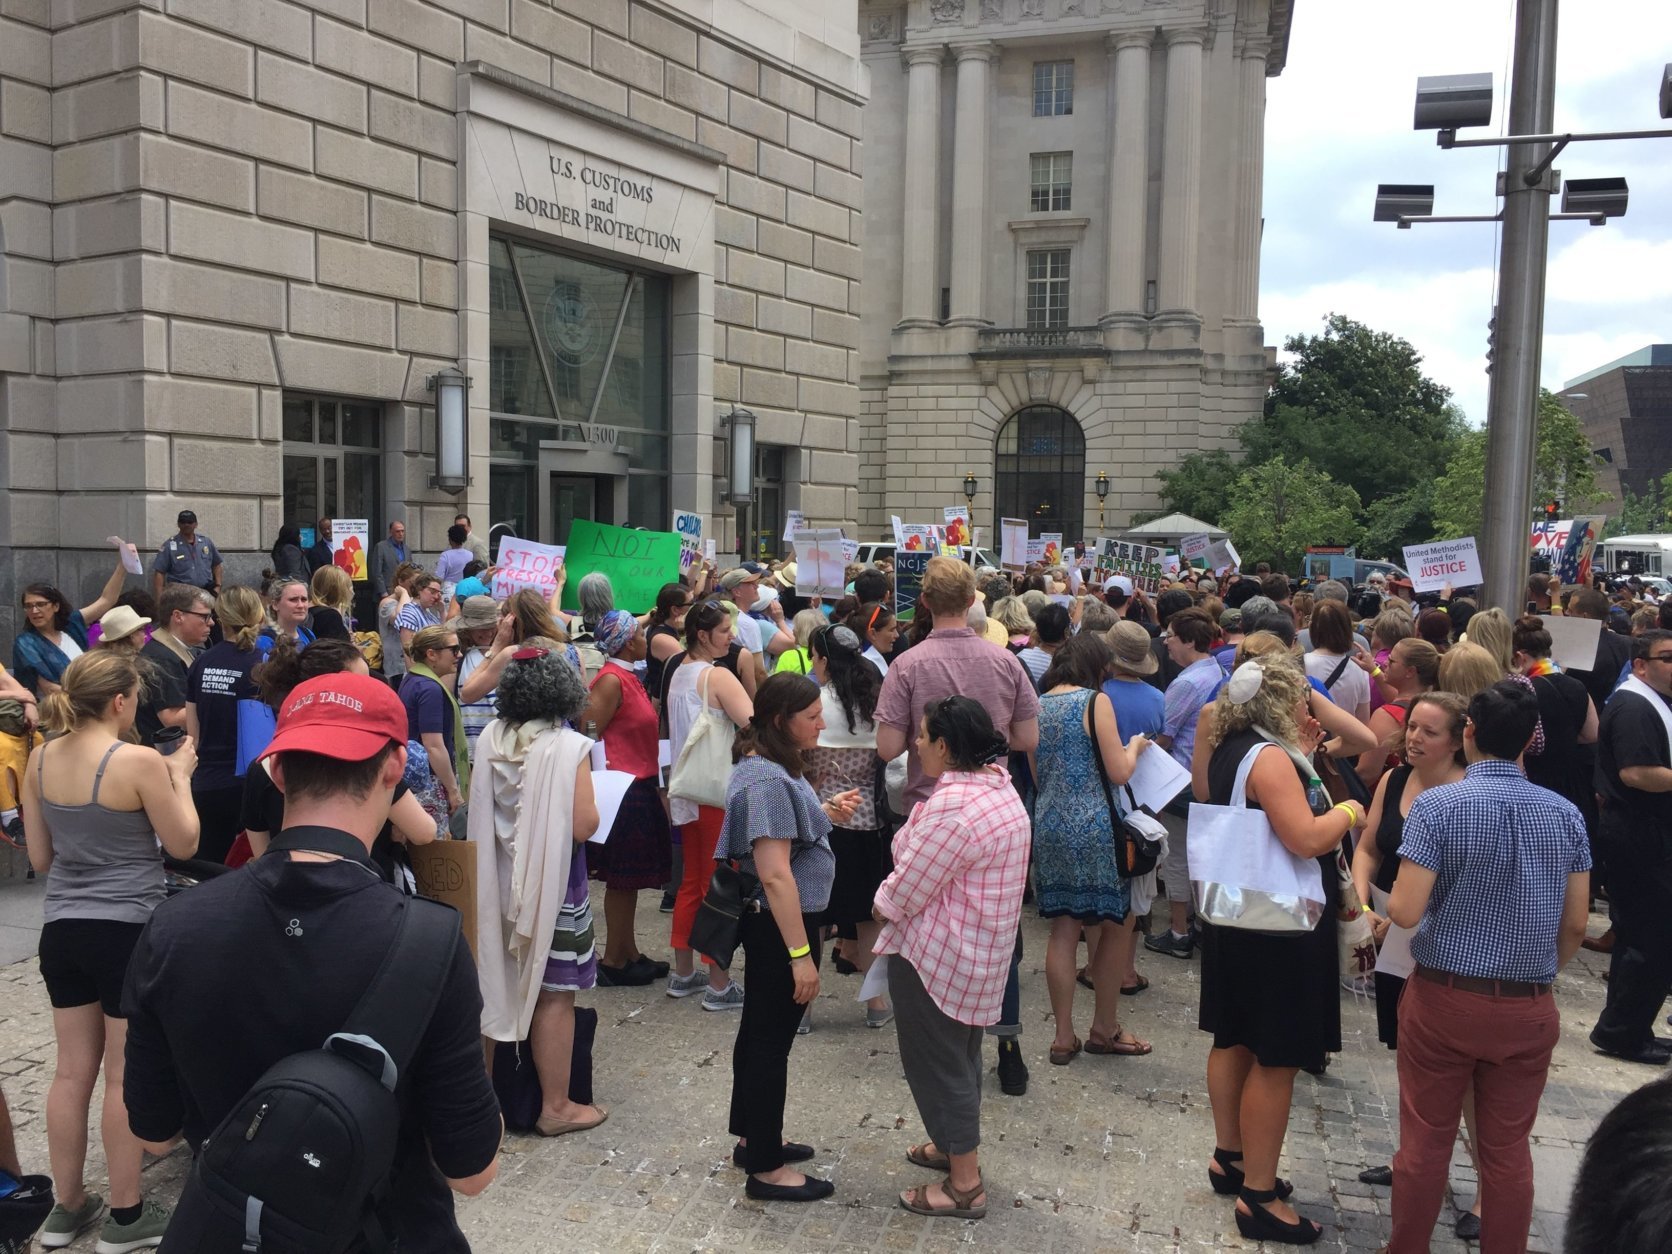 A large group of women chanted "let the children go...now" and spoke against President Trump's "zero tolerance" immigration policy outside of the United States Customs and Border Protection headquarters in D.C. on Tuesday. (Photo by Don Squires)